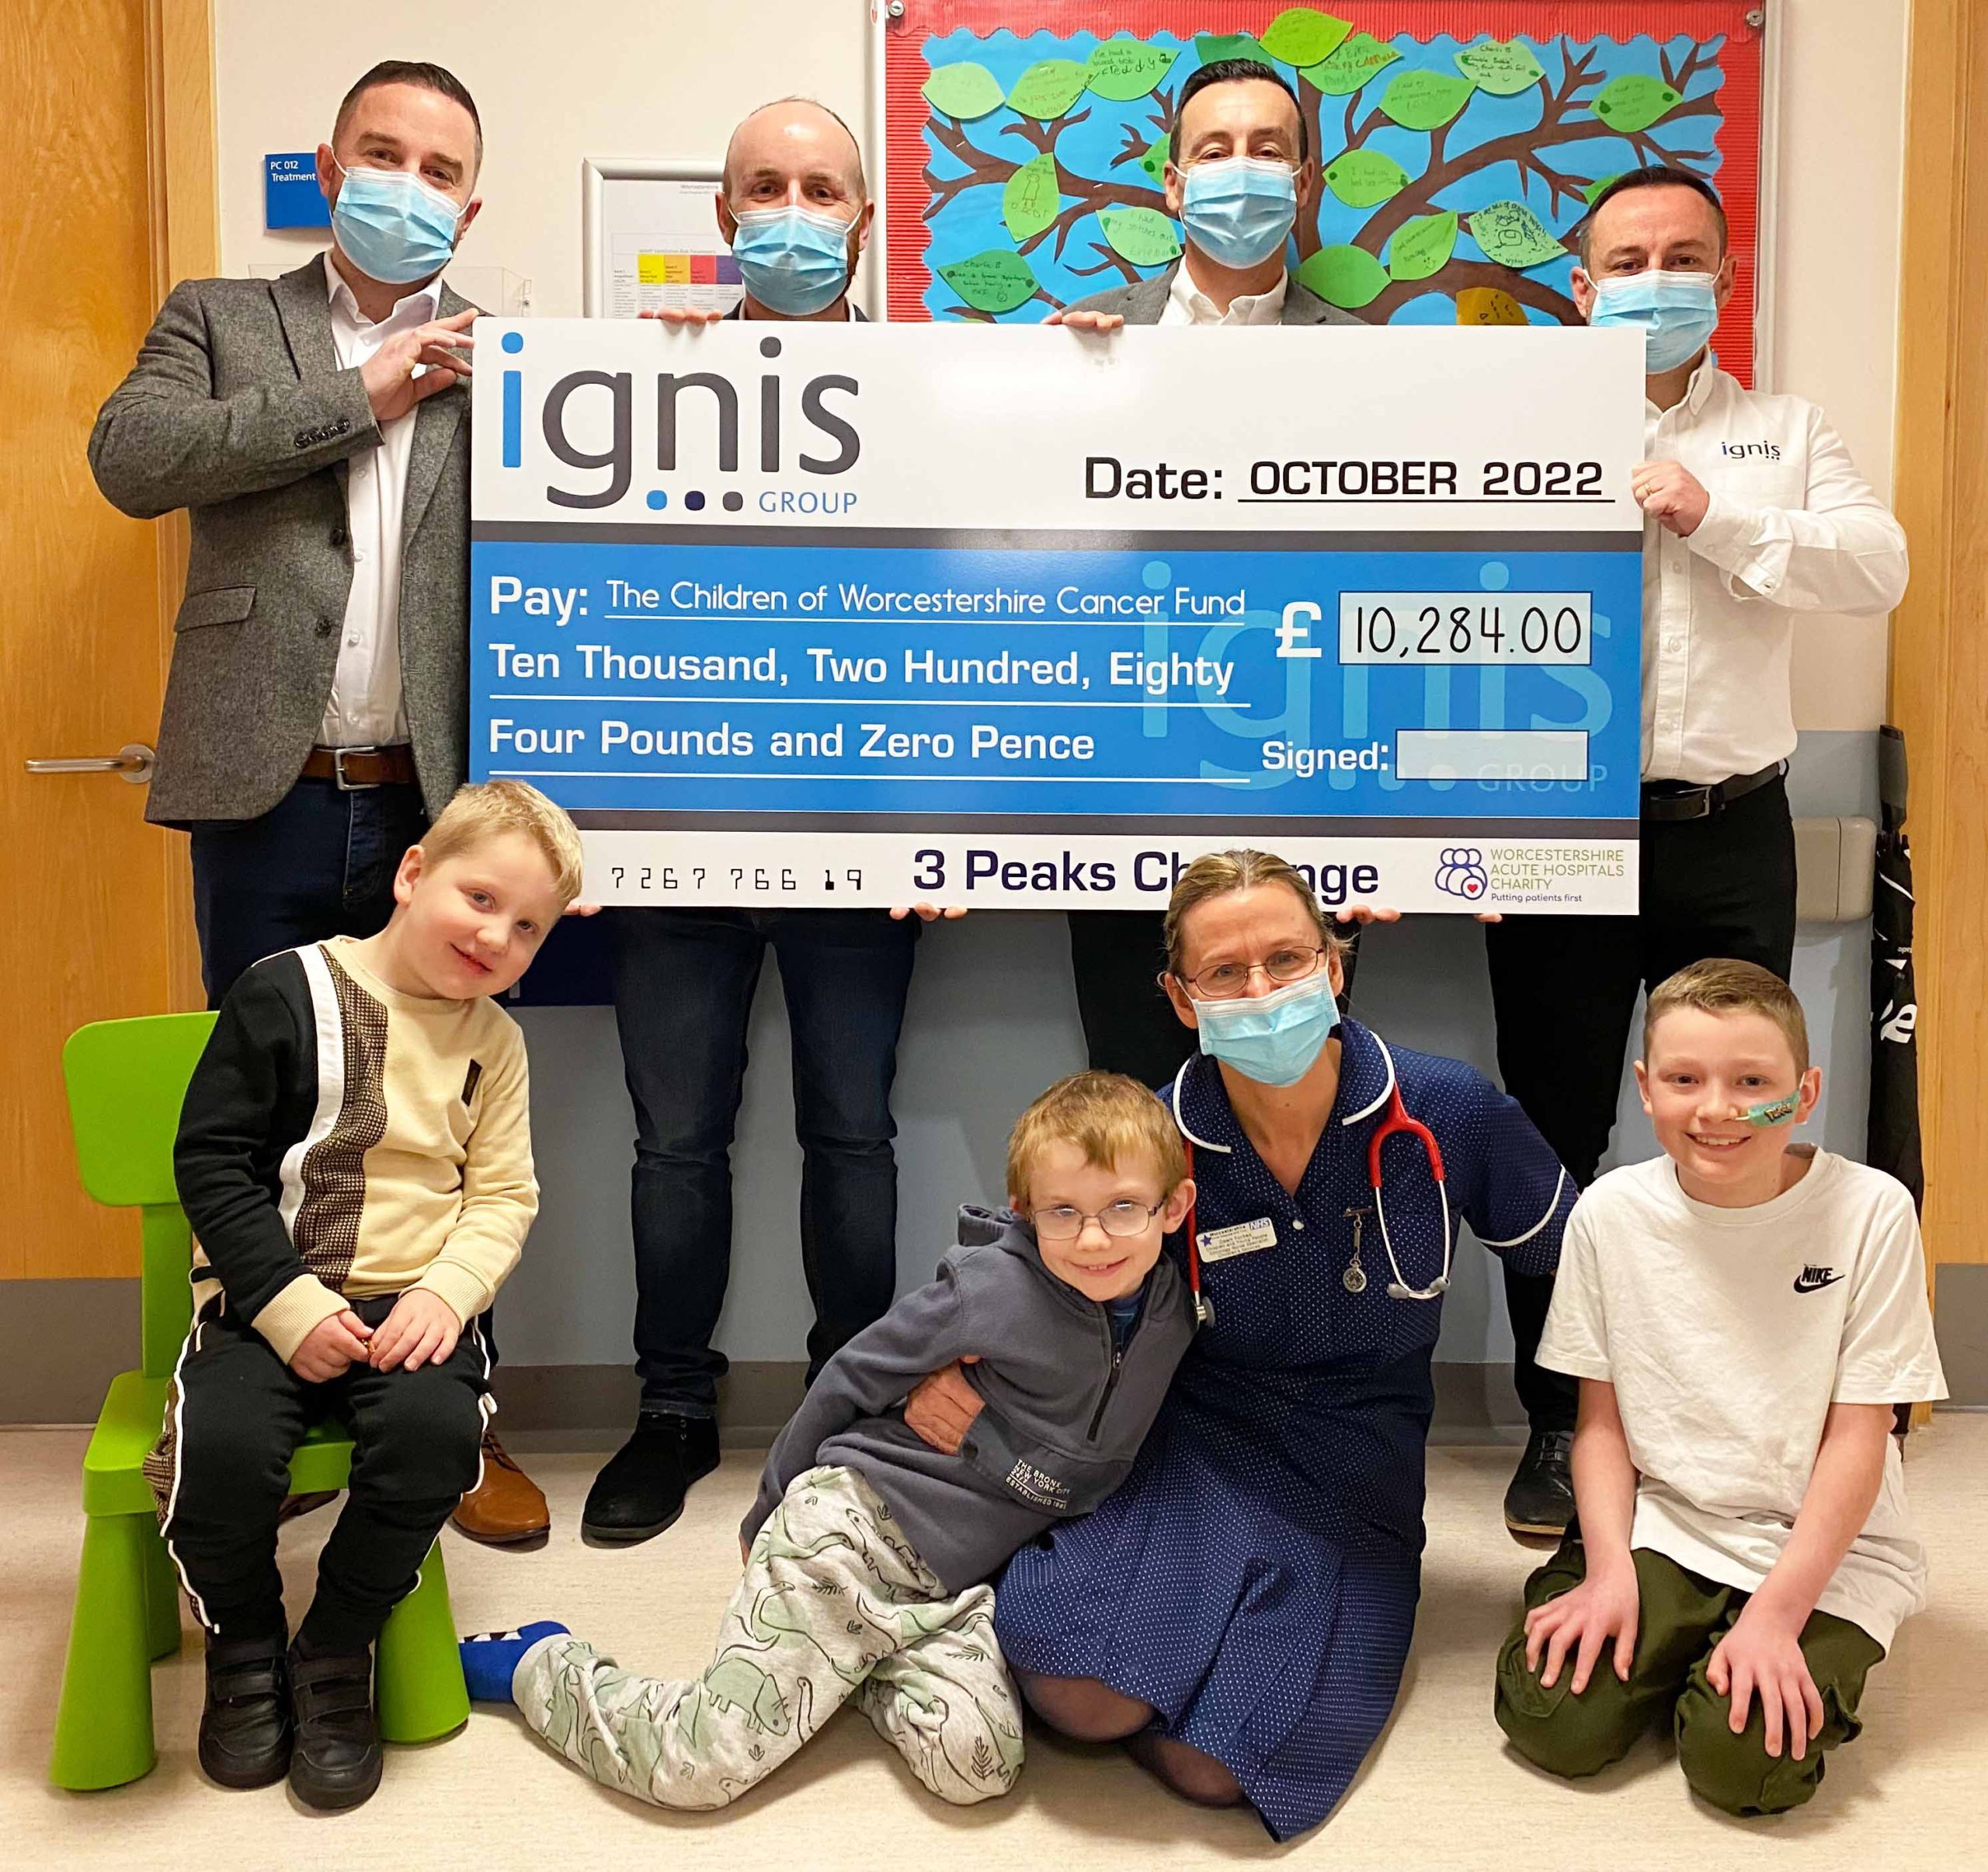 Team Ignis raise over £10K for Children of Worcestershire Cancer Fund